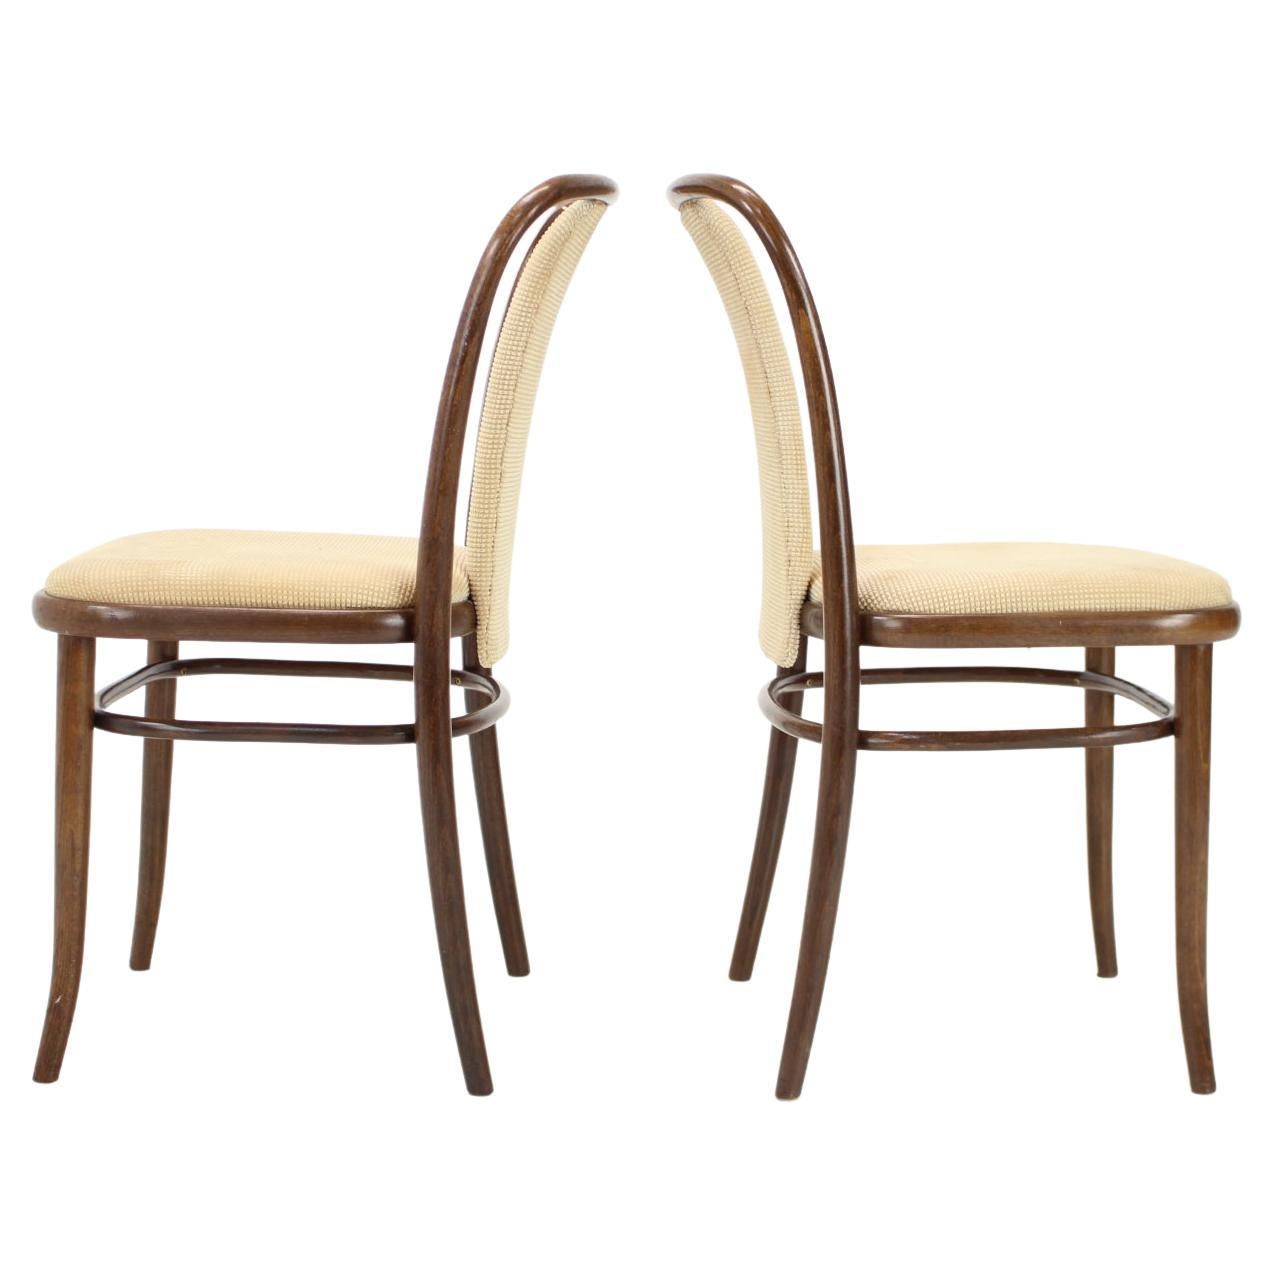 Set of Two Bentwood Chairs, Ton, 1980s For Sale